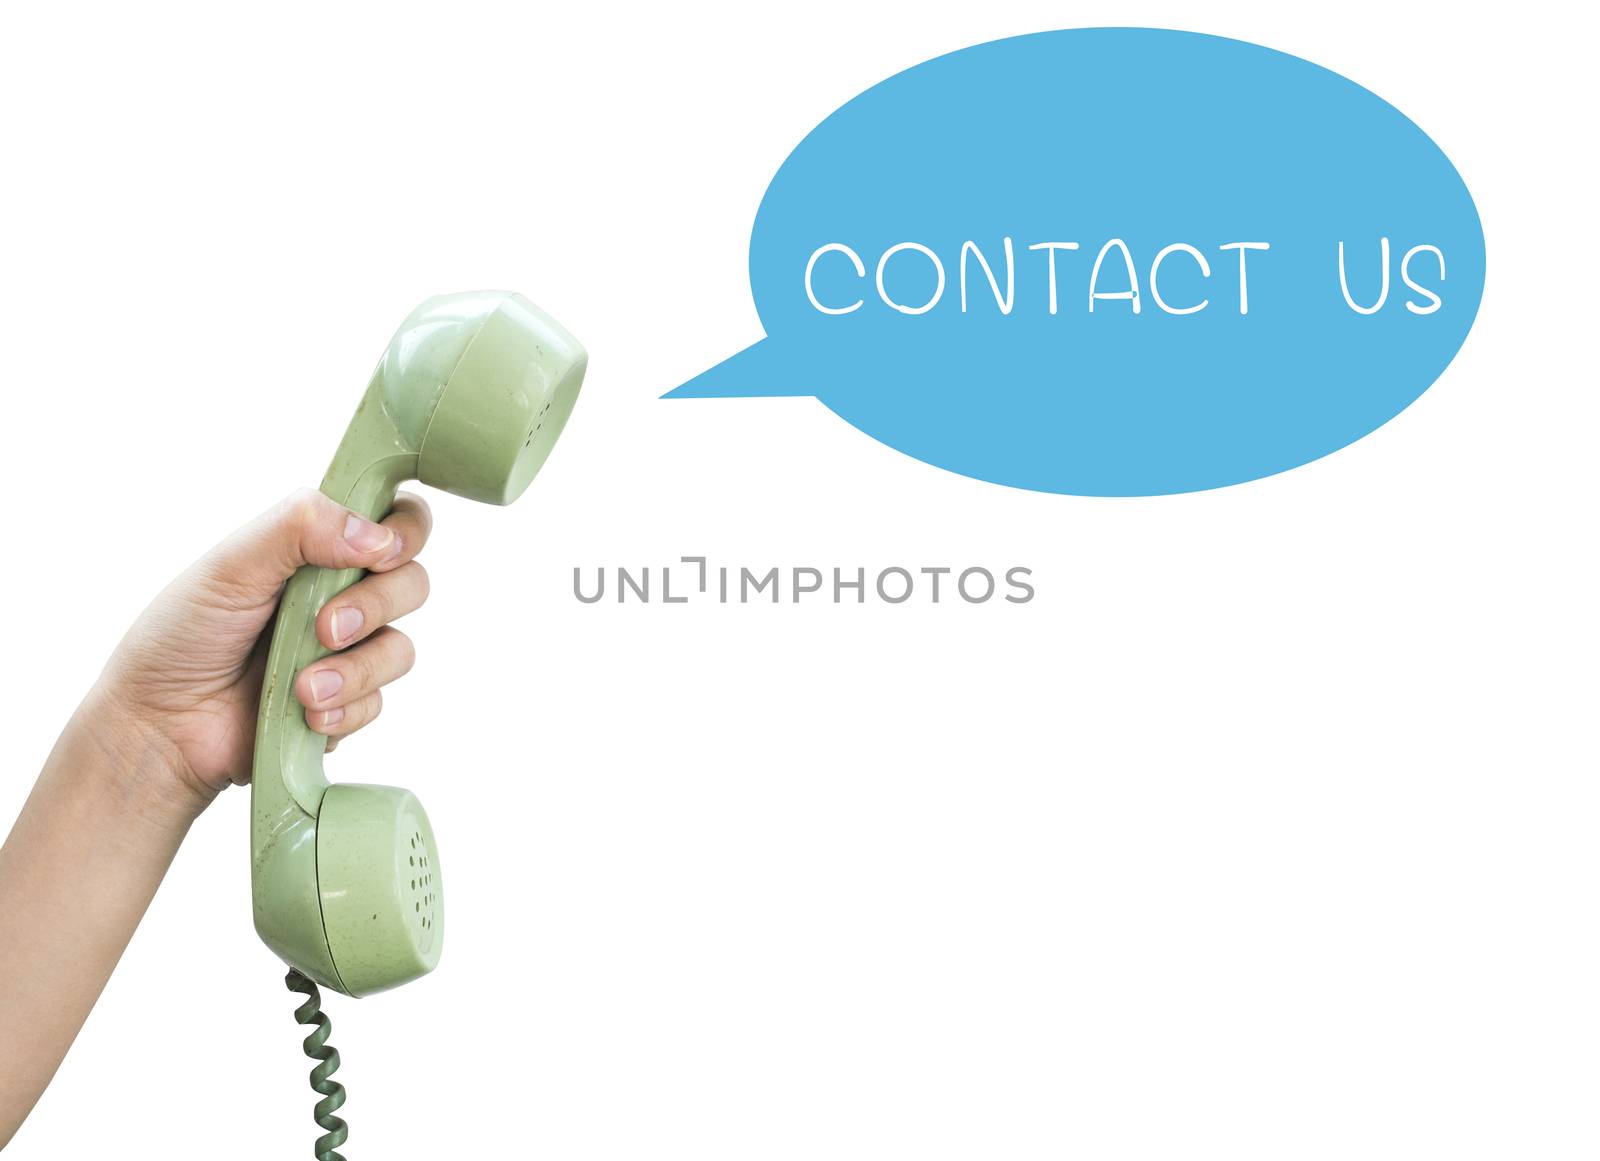 Contact Us. Hand hold vintage telephone isolated on white backgr by 2nix